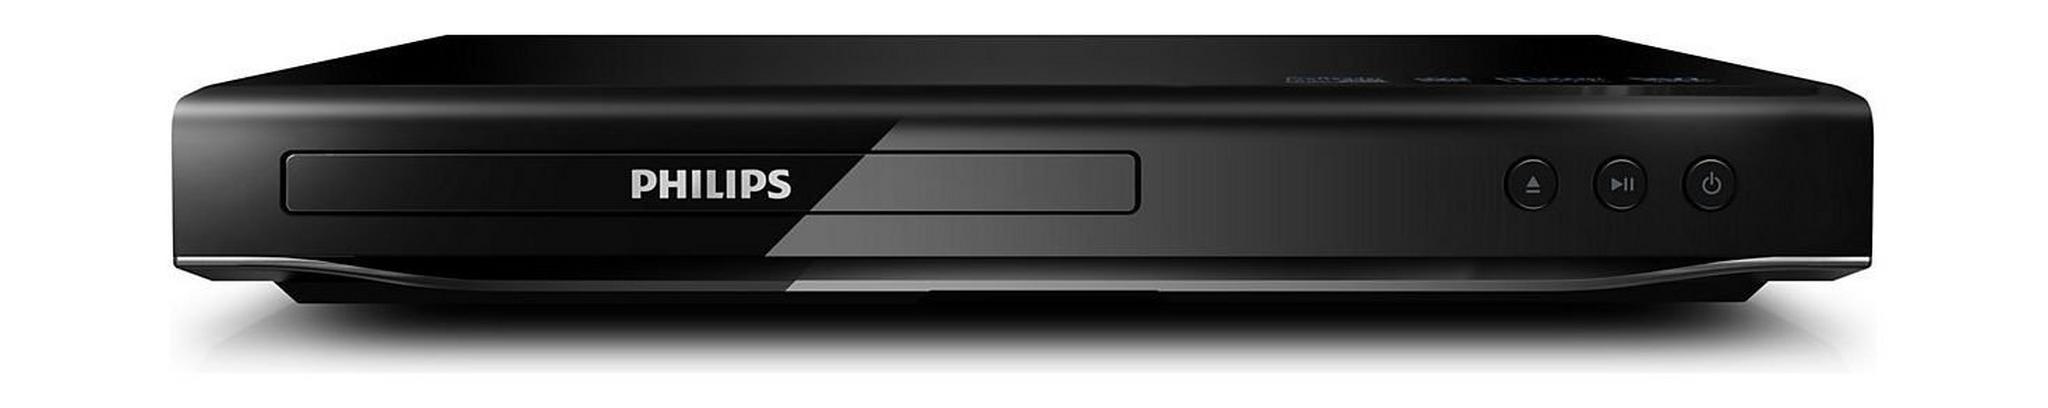 Philips DVP2880 DVD Player With HDMI